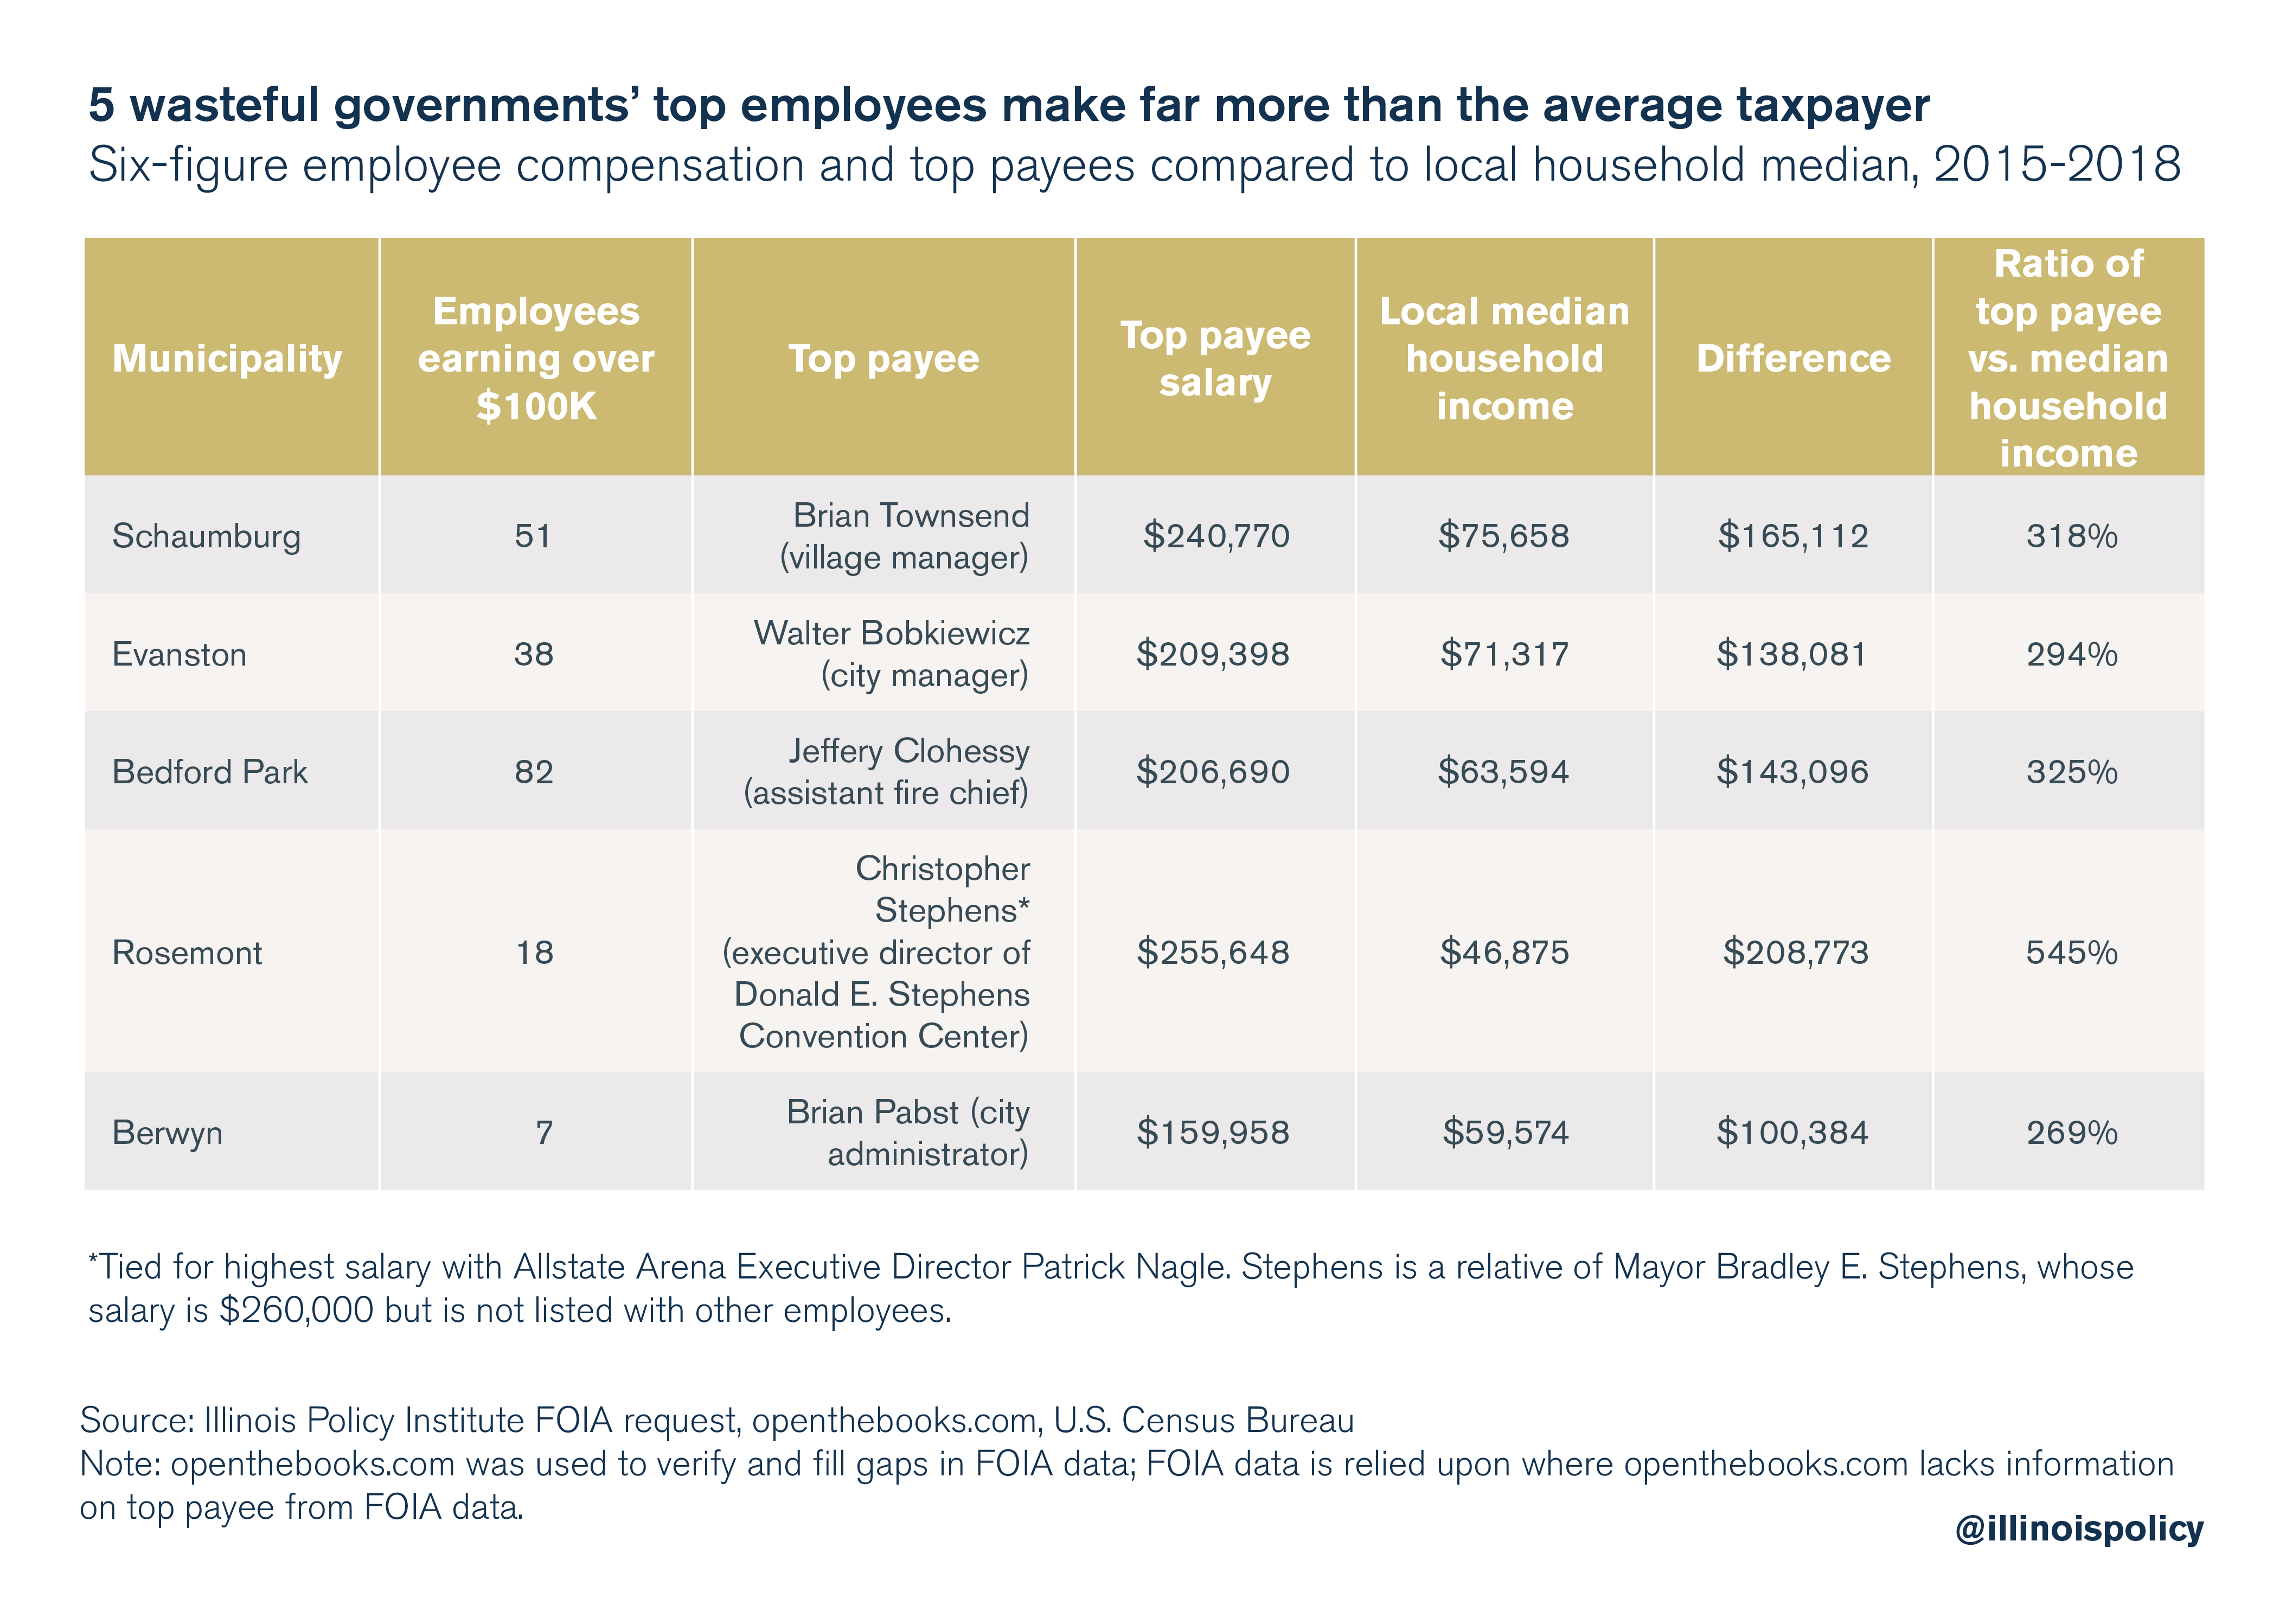 5 wasteful governments' top employees make more than the average taxpayer